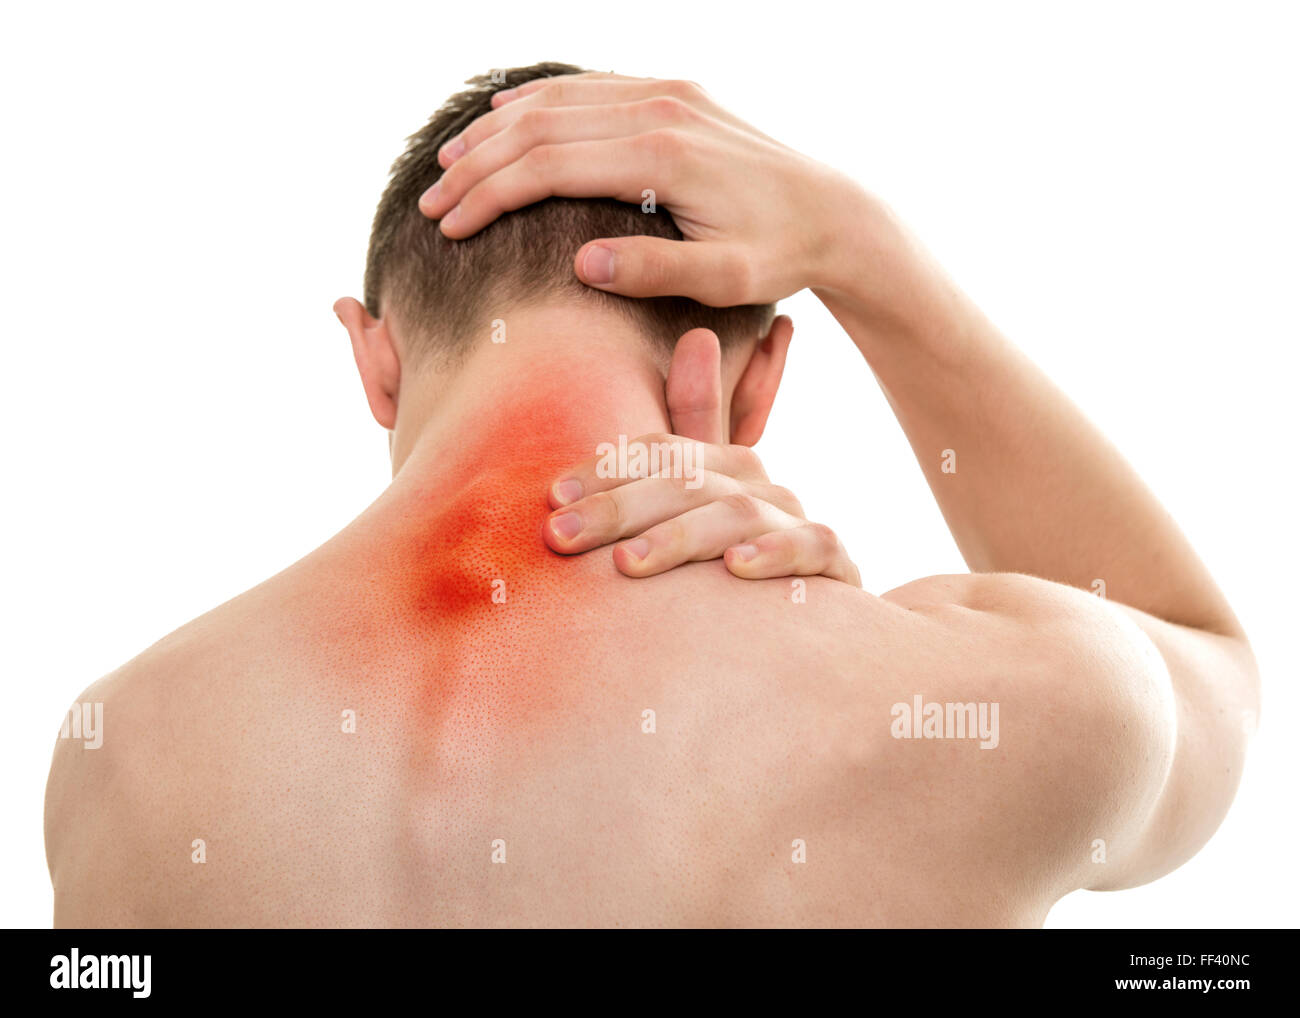 Young Sportsman with Pain in Neck isolated on white Stock Photo